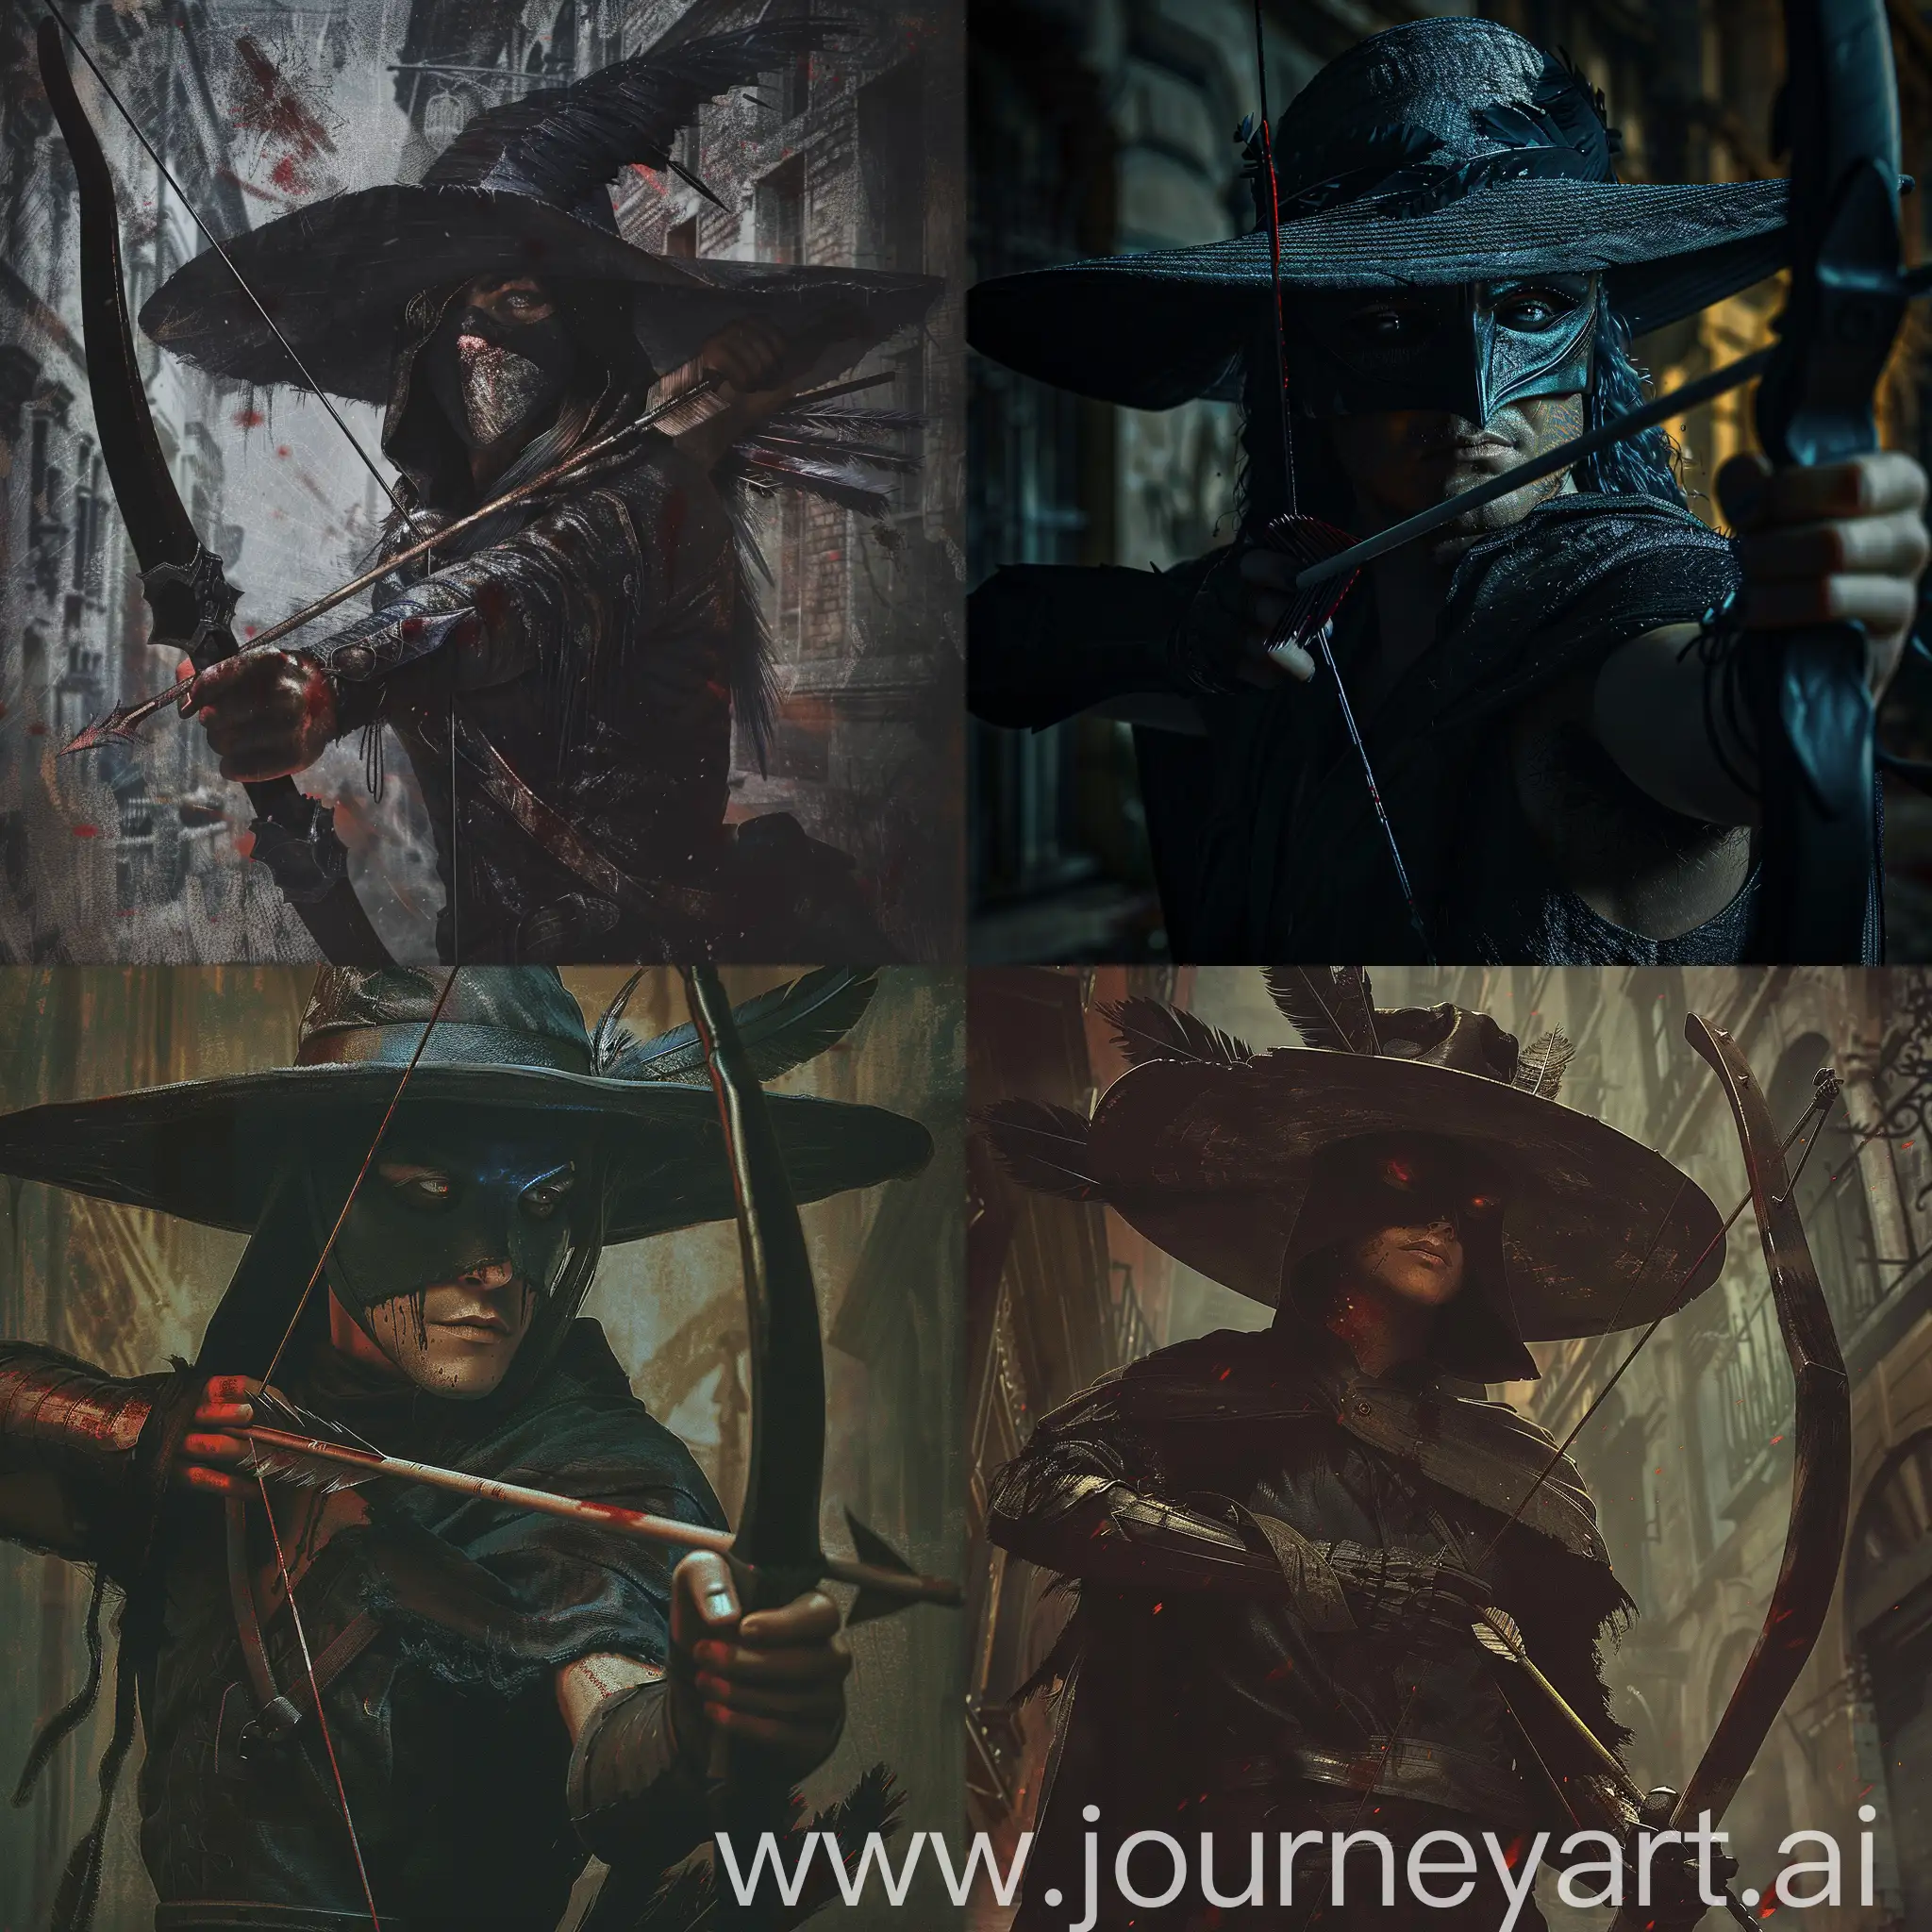 Shadow-Archer-Ebon-Bow-and-Midnight-Raven-Mask-in-Gritty-1970s-Dark-Fantasy-Style